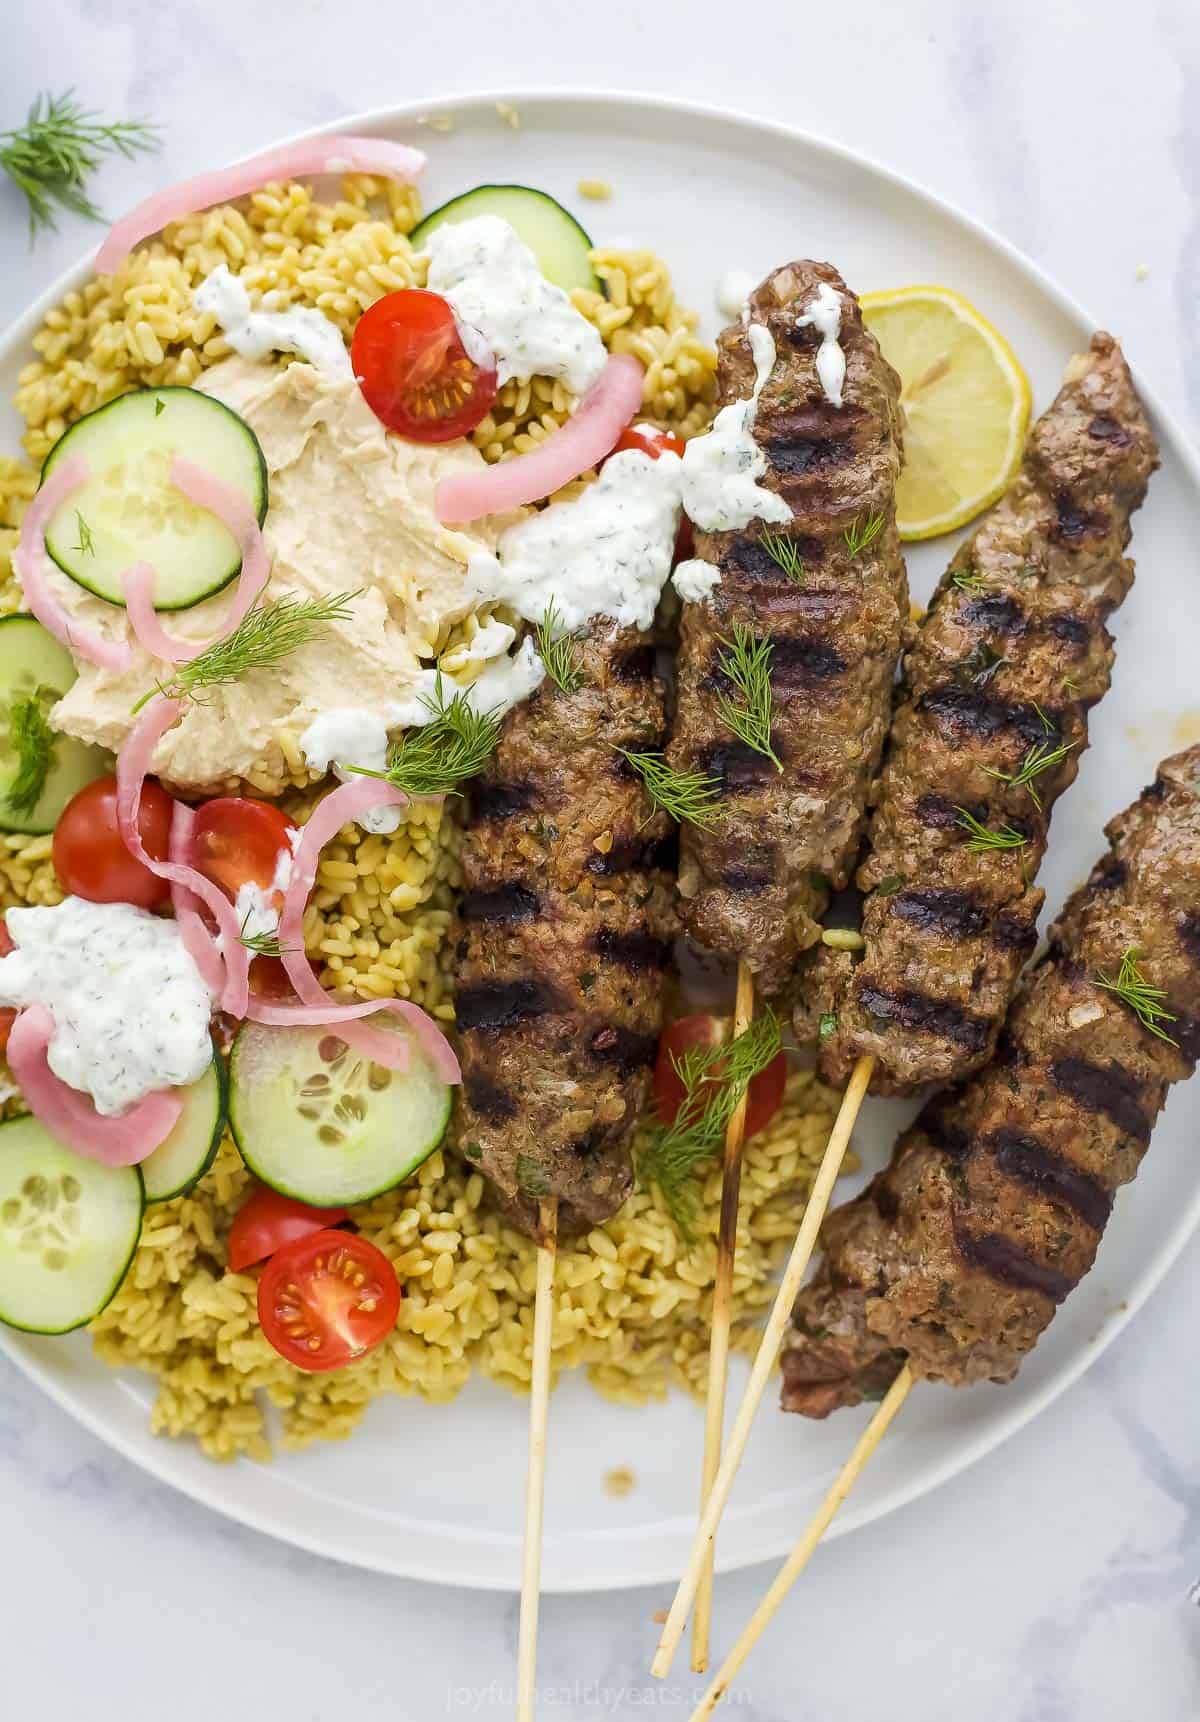 A plate full of kefta, rice, cucumbers, tomato and tzatziki sauce